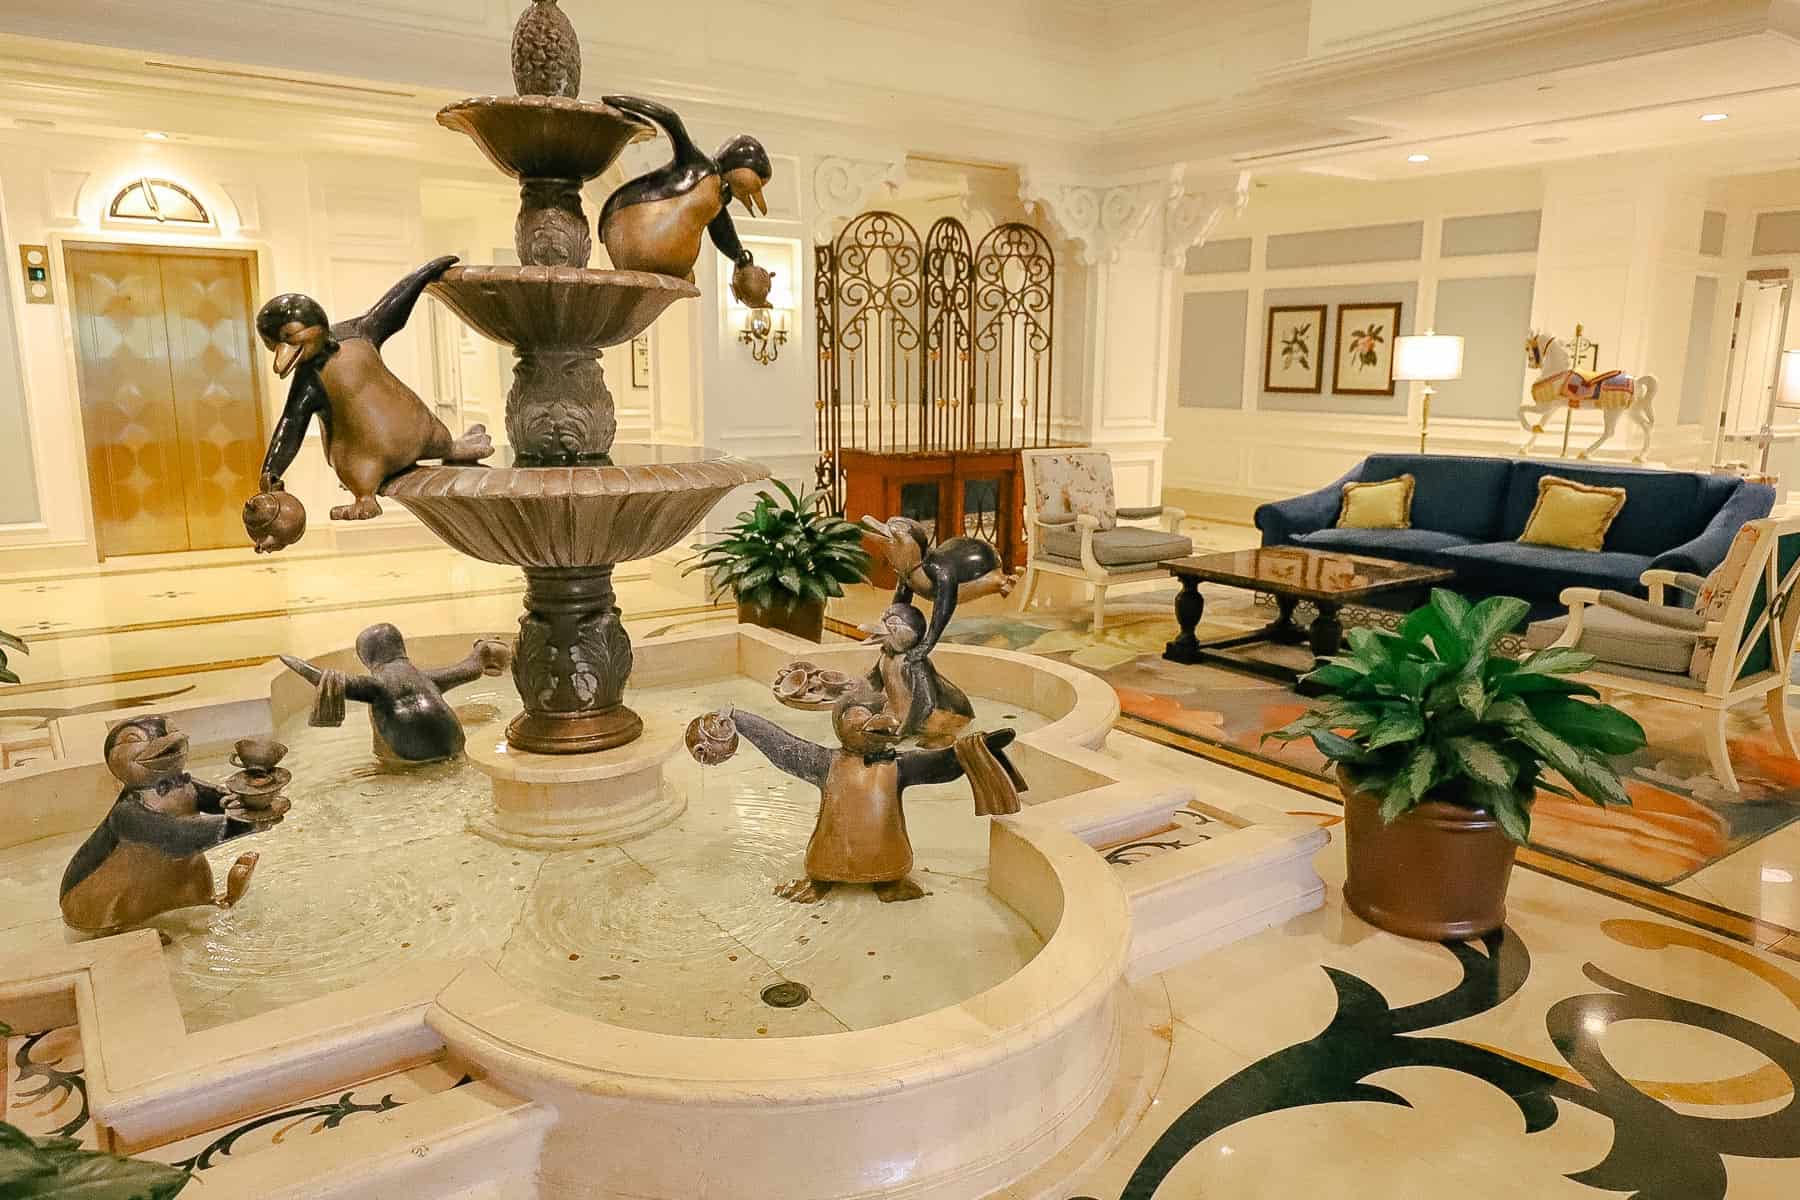 fountain with penguins from Mary Poppins in a deluxe resort hotel 